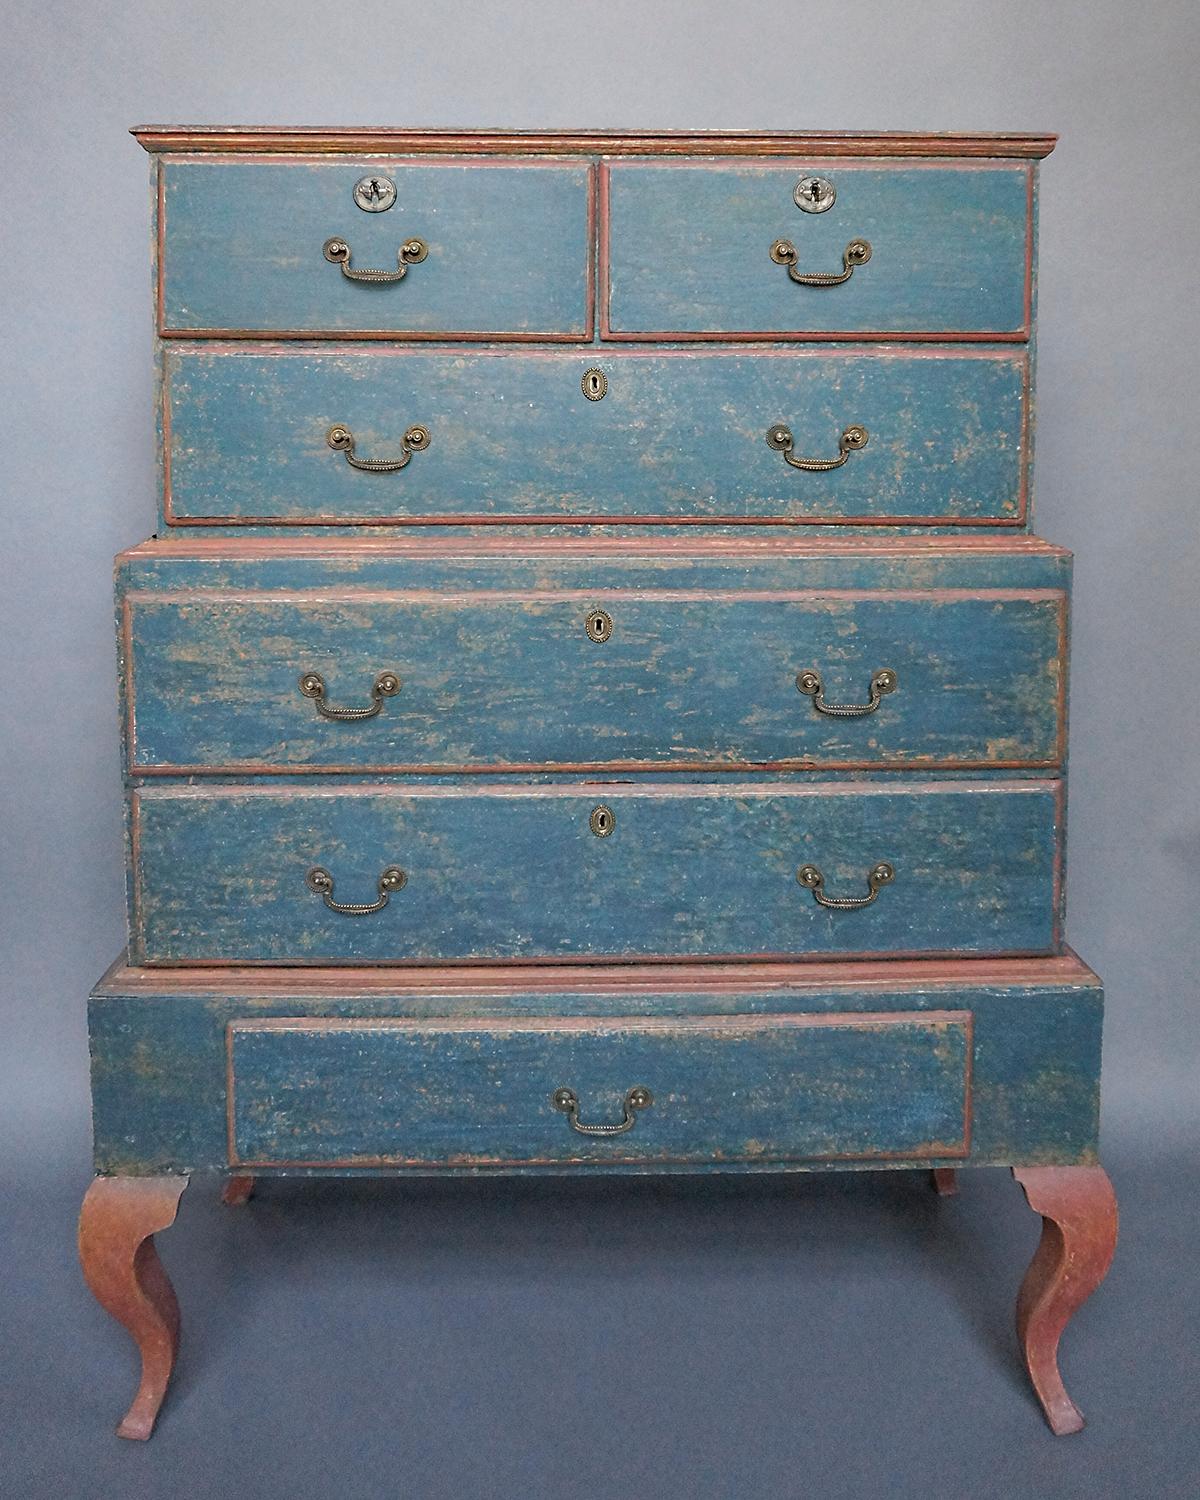 Magnificent 18th century chest on chest in original paint, Norway circa 1780. Constructed in three parts, the upper section has two drawers over one full-width drawer. The middle section has two wide drawers and sits on a separate base with a single